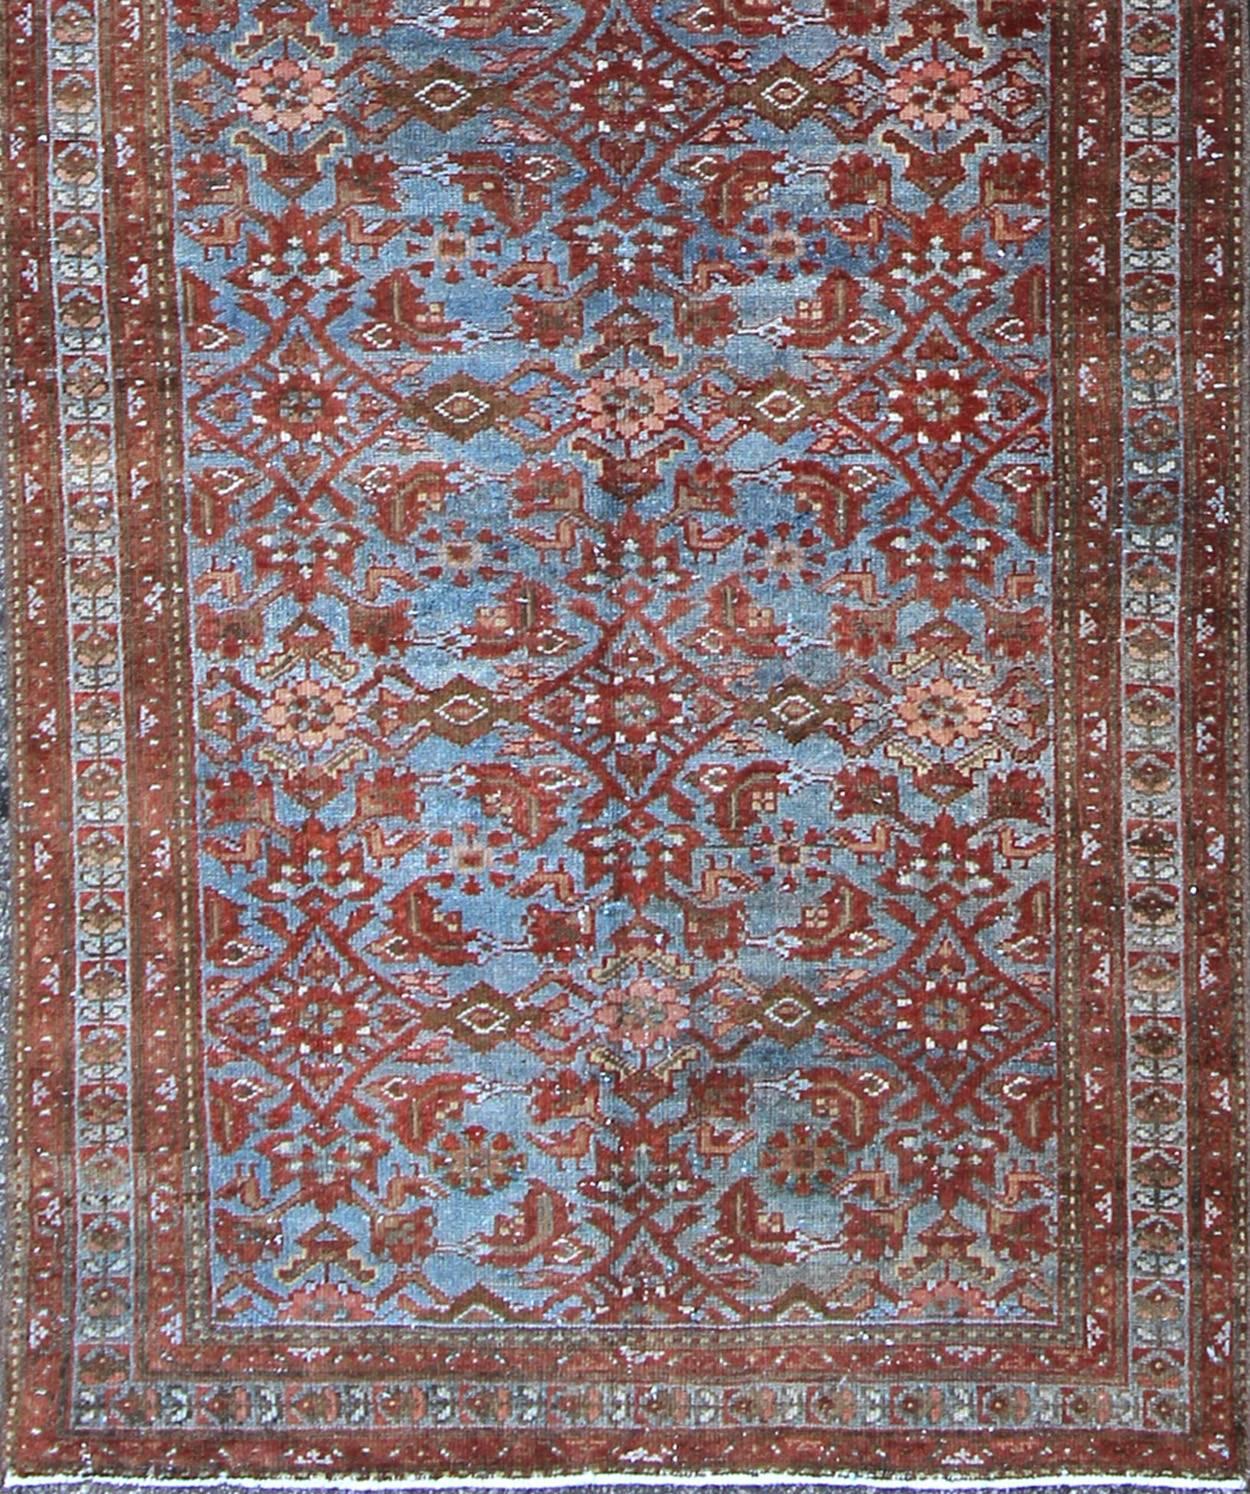 This magnificent antique Persian Malayer carpet, of an impressive size, bears a beautiful, all-over sub-geometric design paired with a delightful palette of various shades of light blue, deep red and taupe. The central field is filled with a